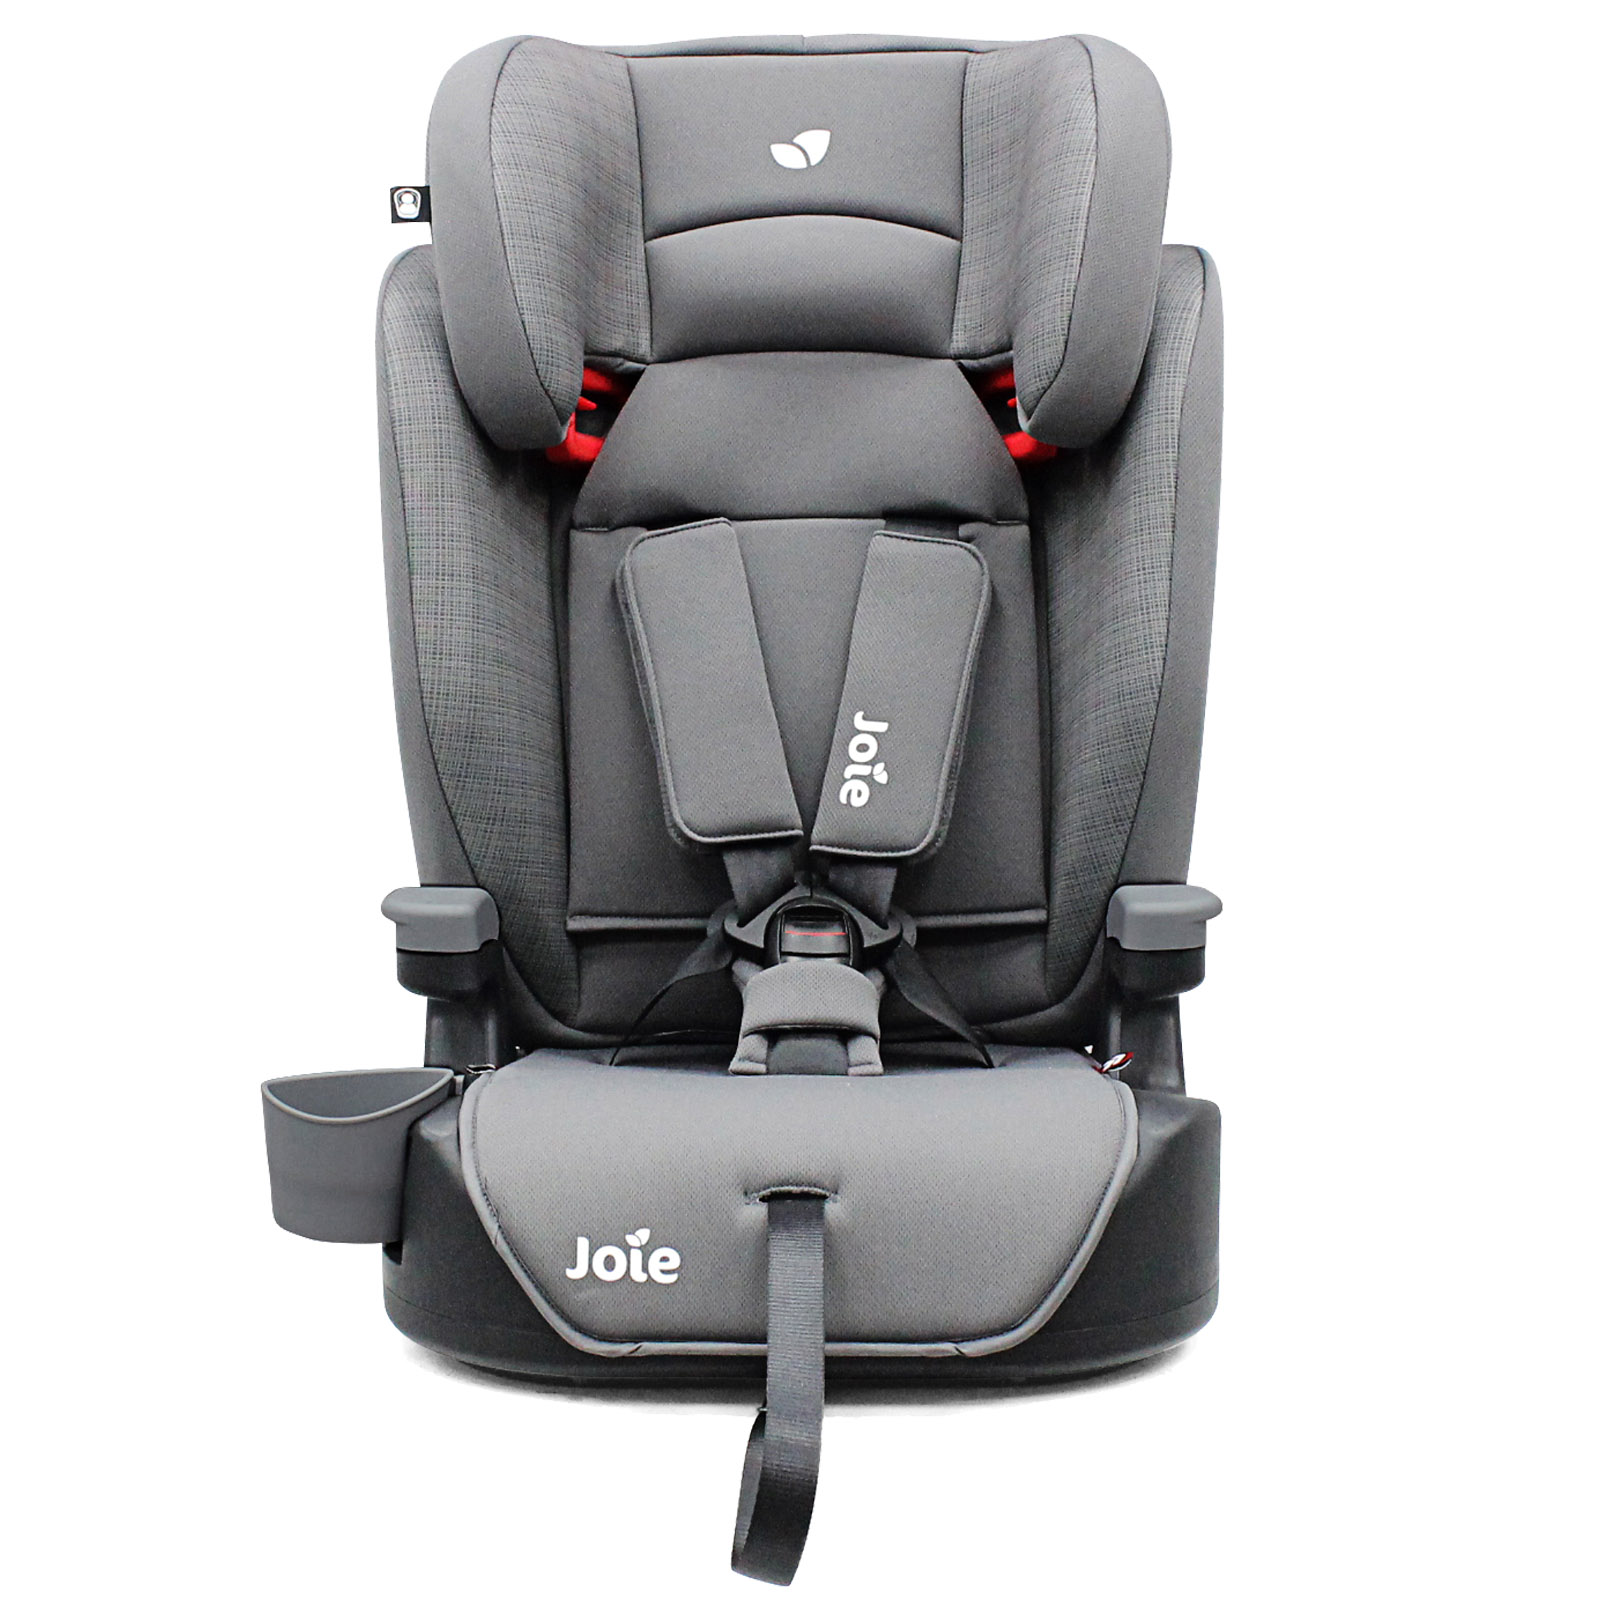 Joie Elevate Group 123 High Back Booster Car Seat - Grey | Buy at